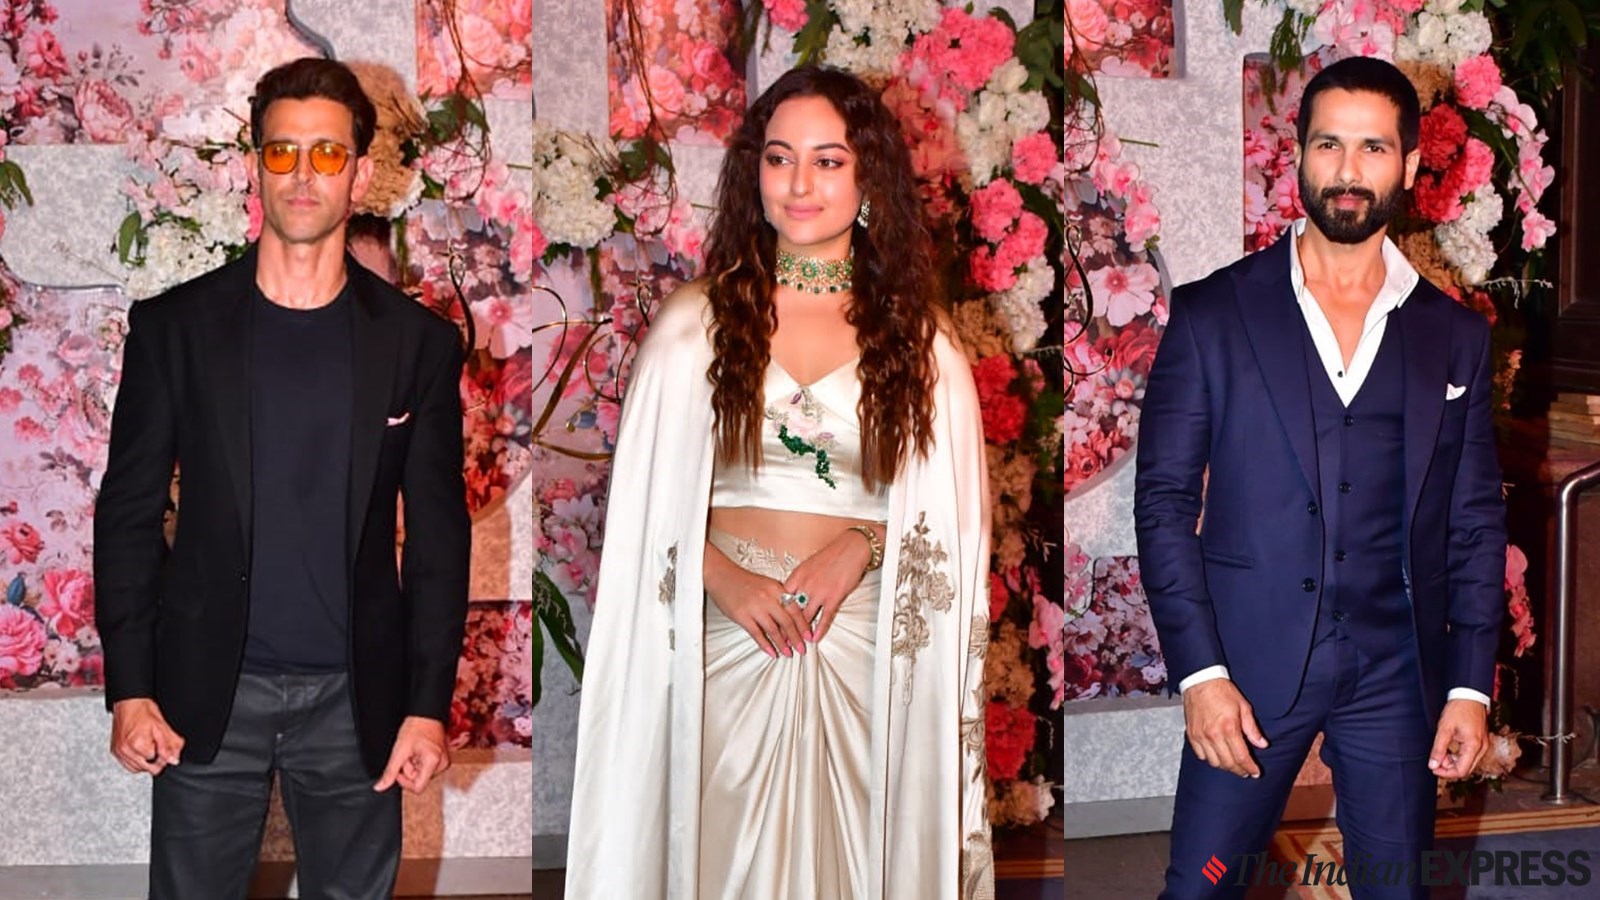 Sonakshi Sinha Ke Sex Photo - Bollywood stars Hrithik Roshan, Sonakshi Sinha, Shahid Kapoor and others,  attend reception party in glam avatars | Fashion News - The Indian Express